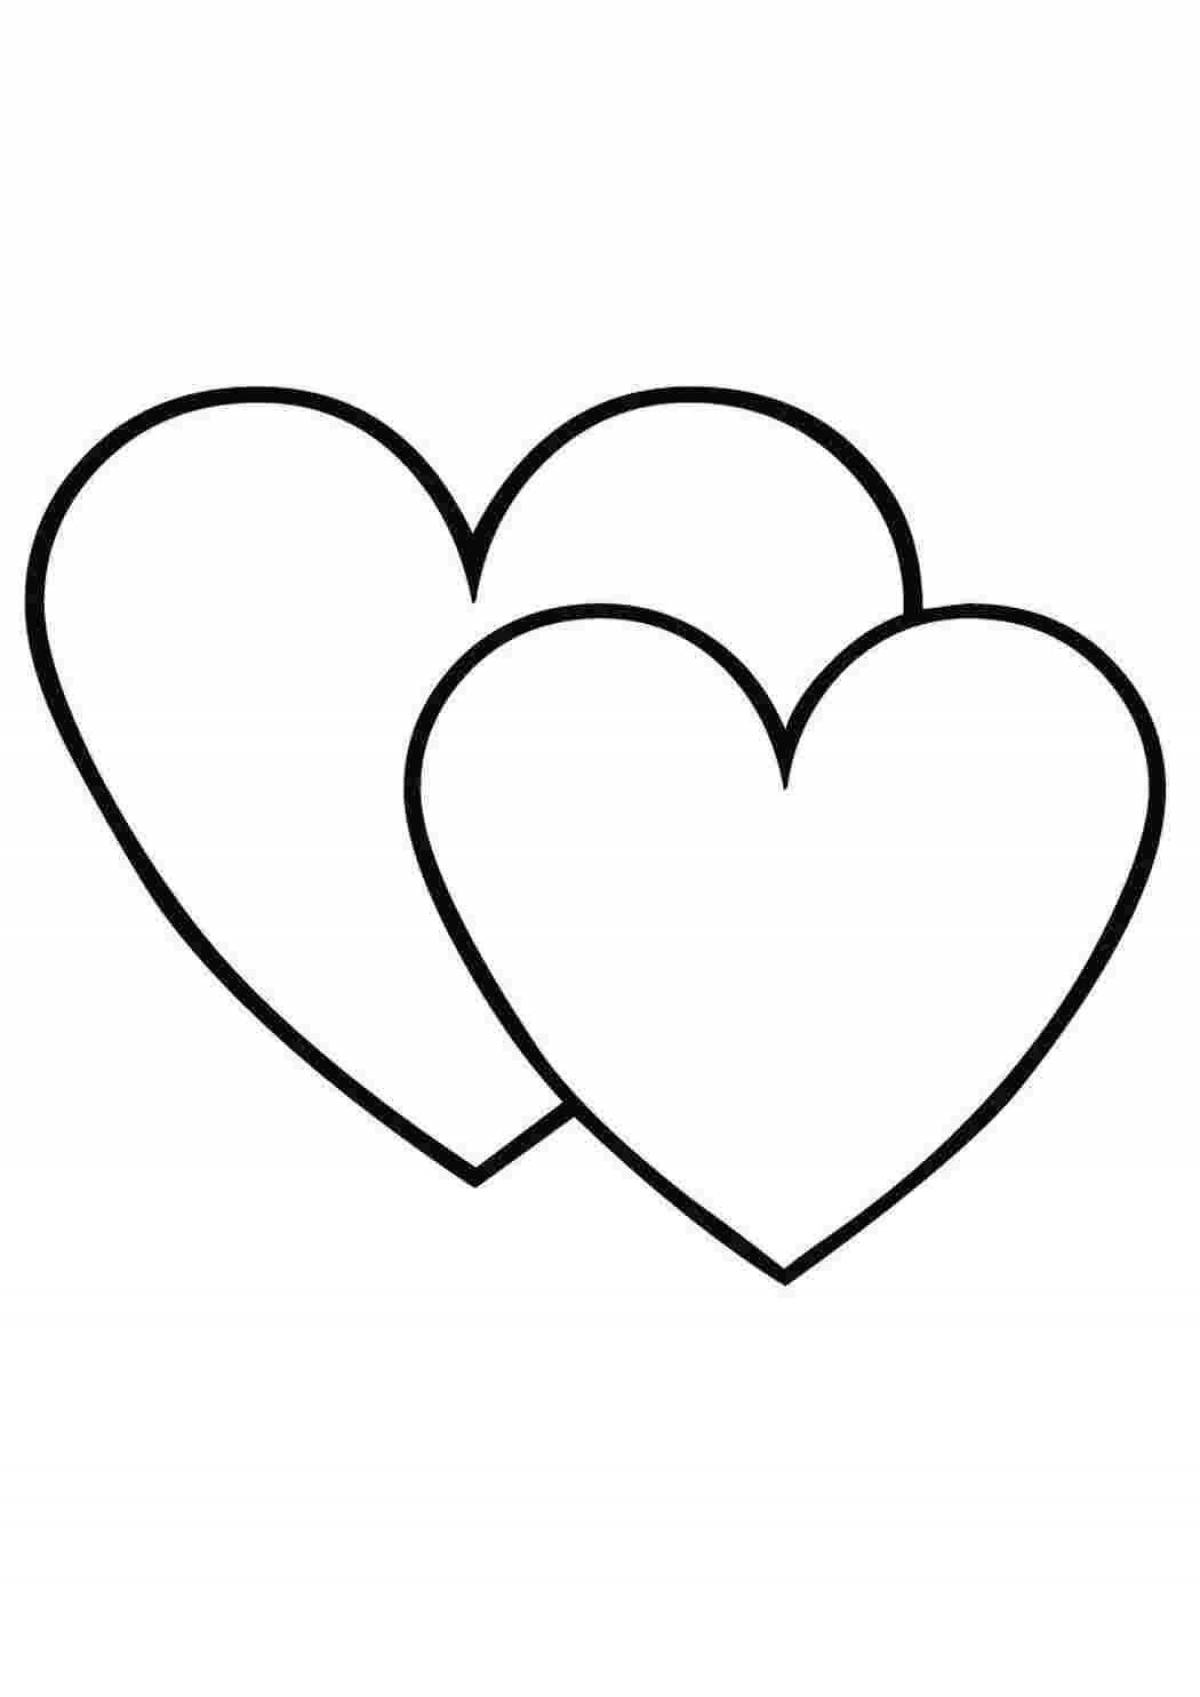 Coloring pages with hearts